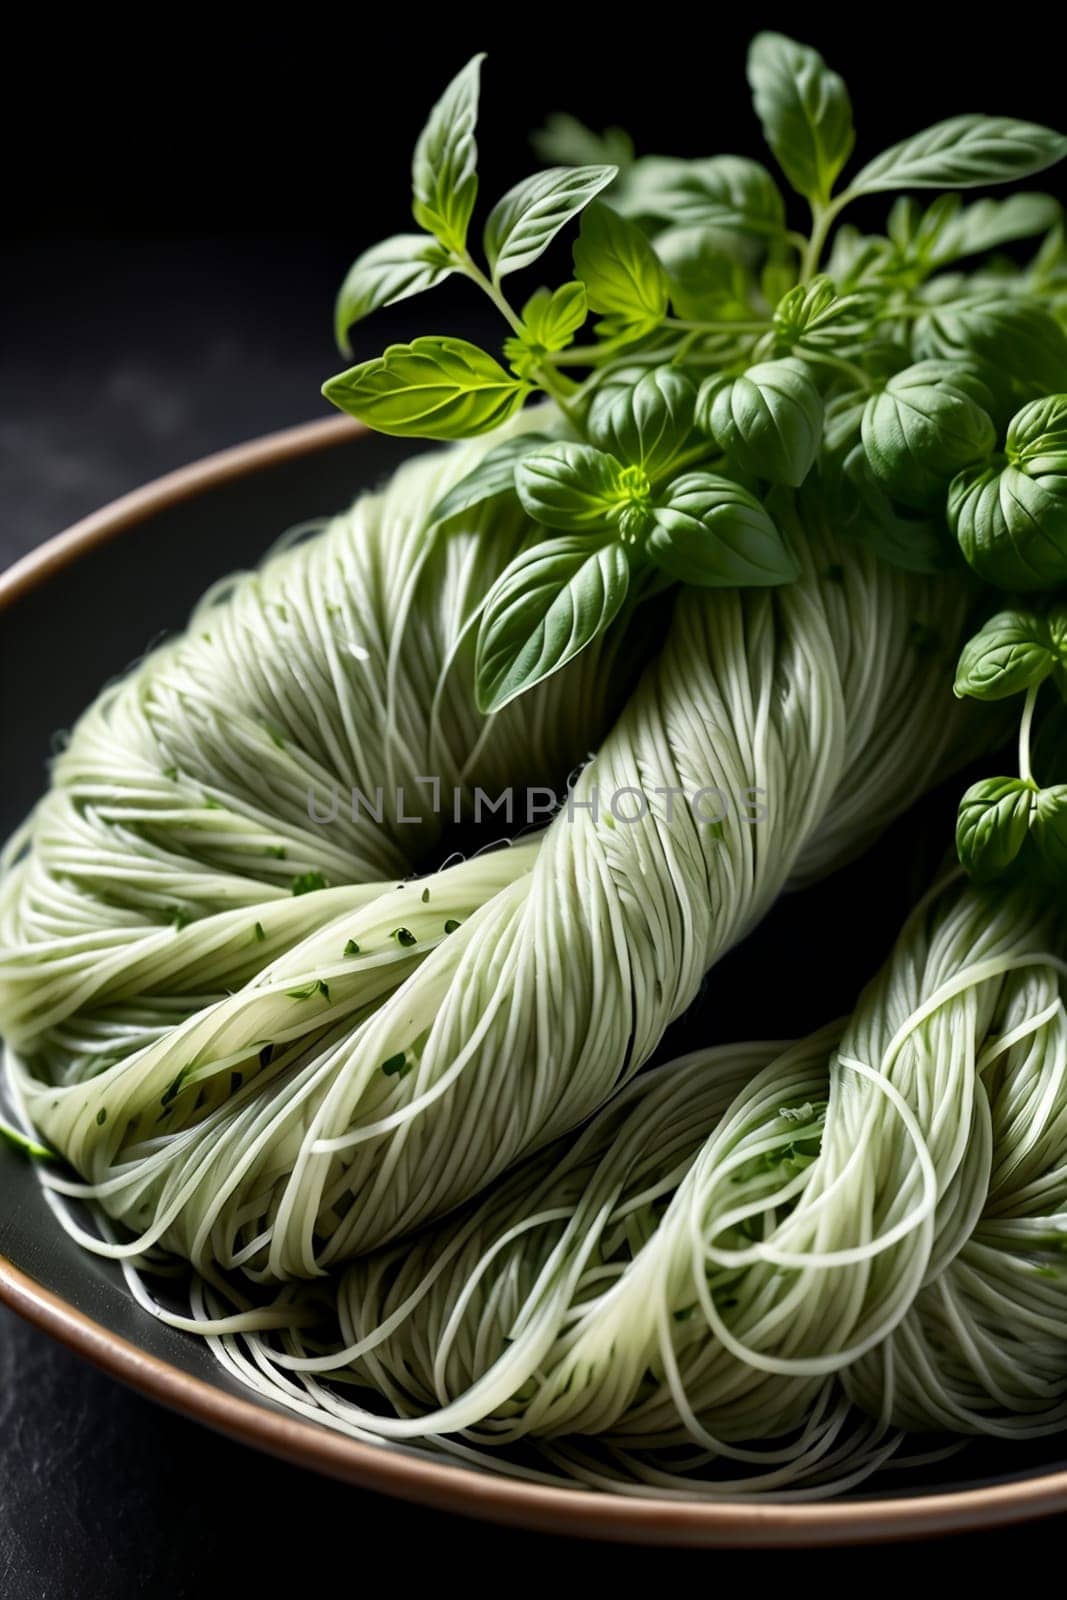 homemade green vermicelli with herbs by Rawlik